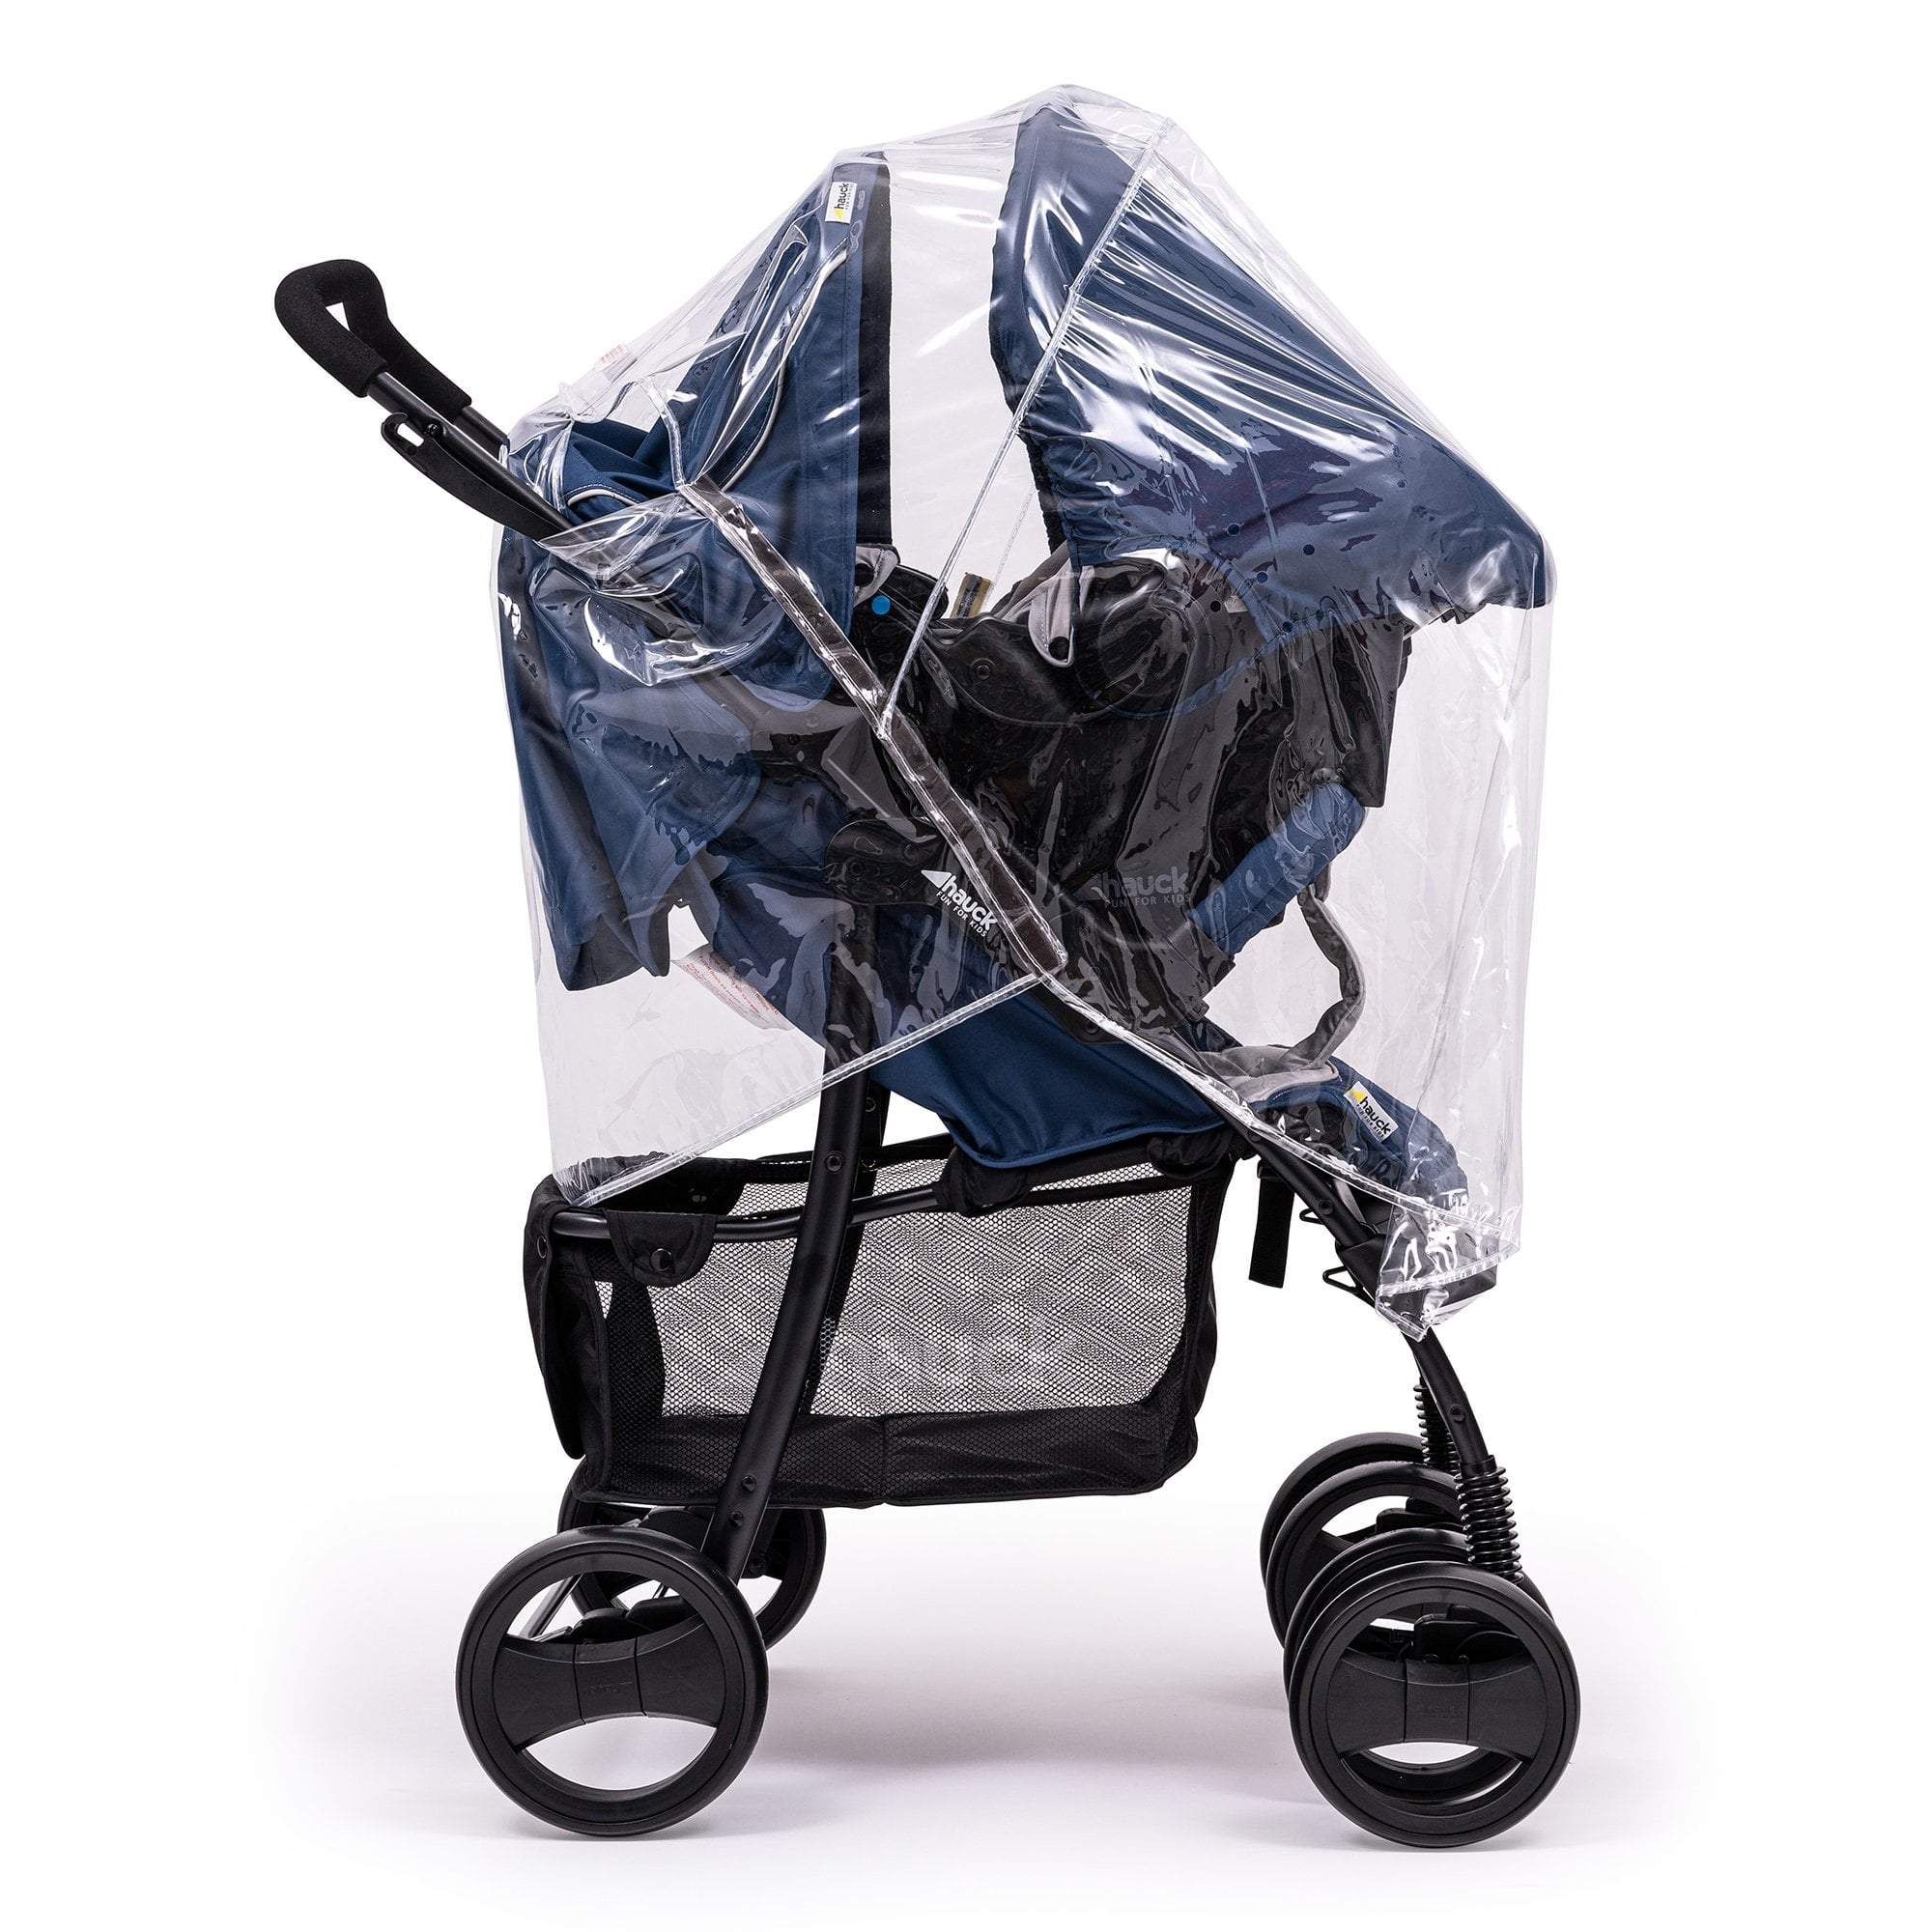 Travel System Raincover Compatible with Nania - Fits All Models - For Your Little One